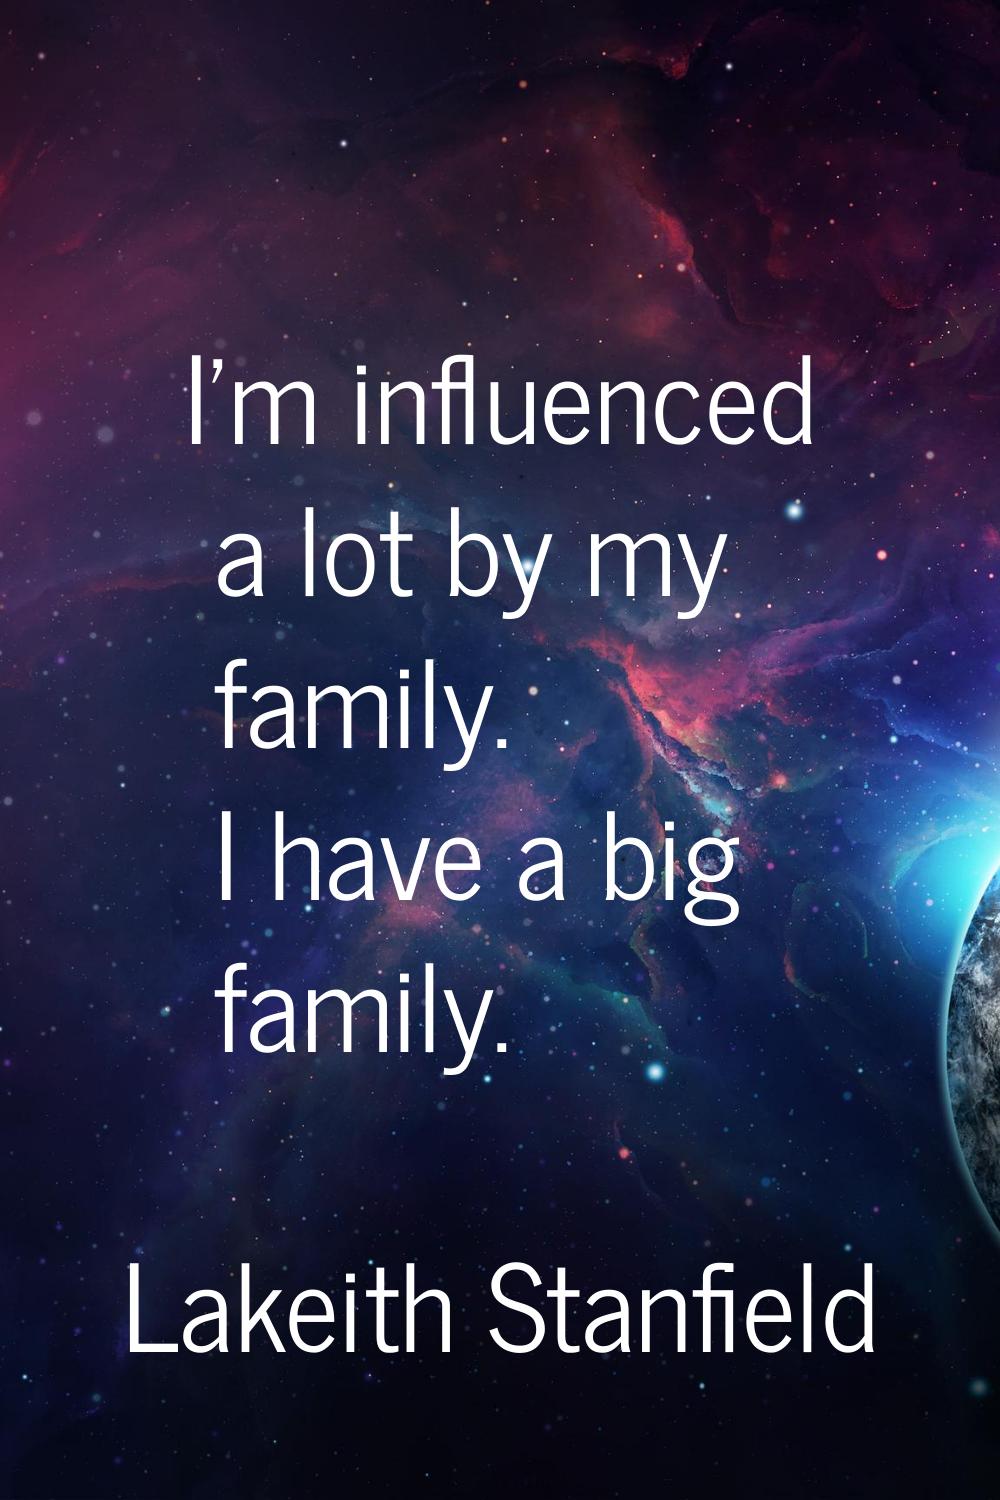 I'm influenced a lot by my family. I have a big family.